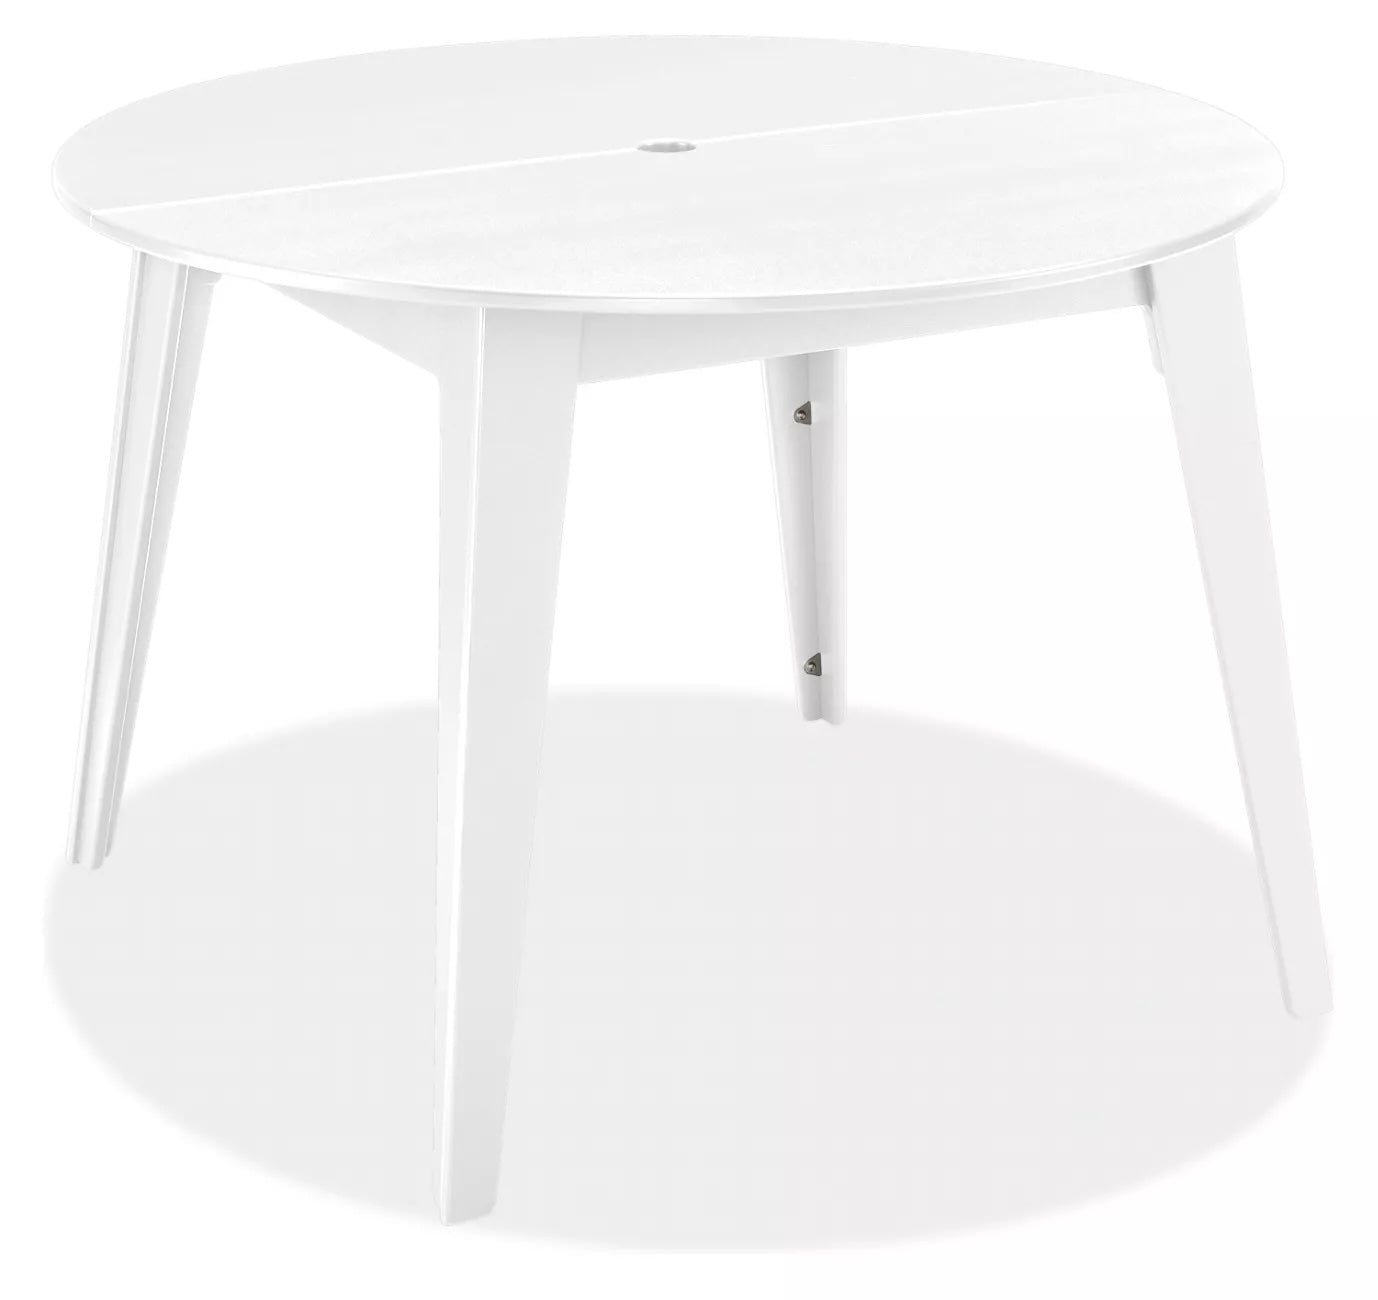 48" Round Dining Table, Employee Sale